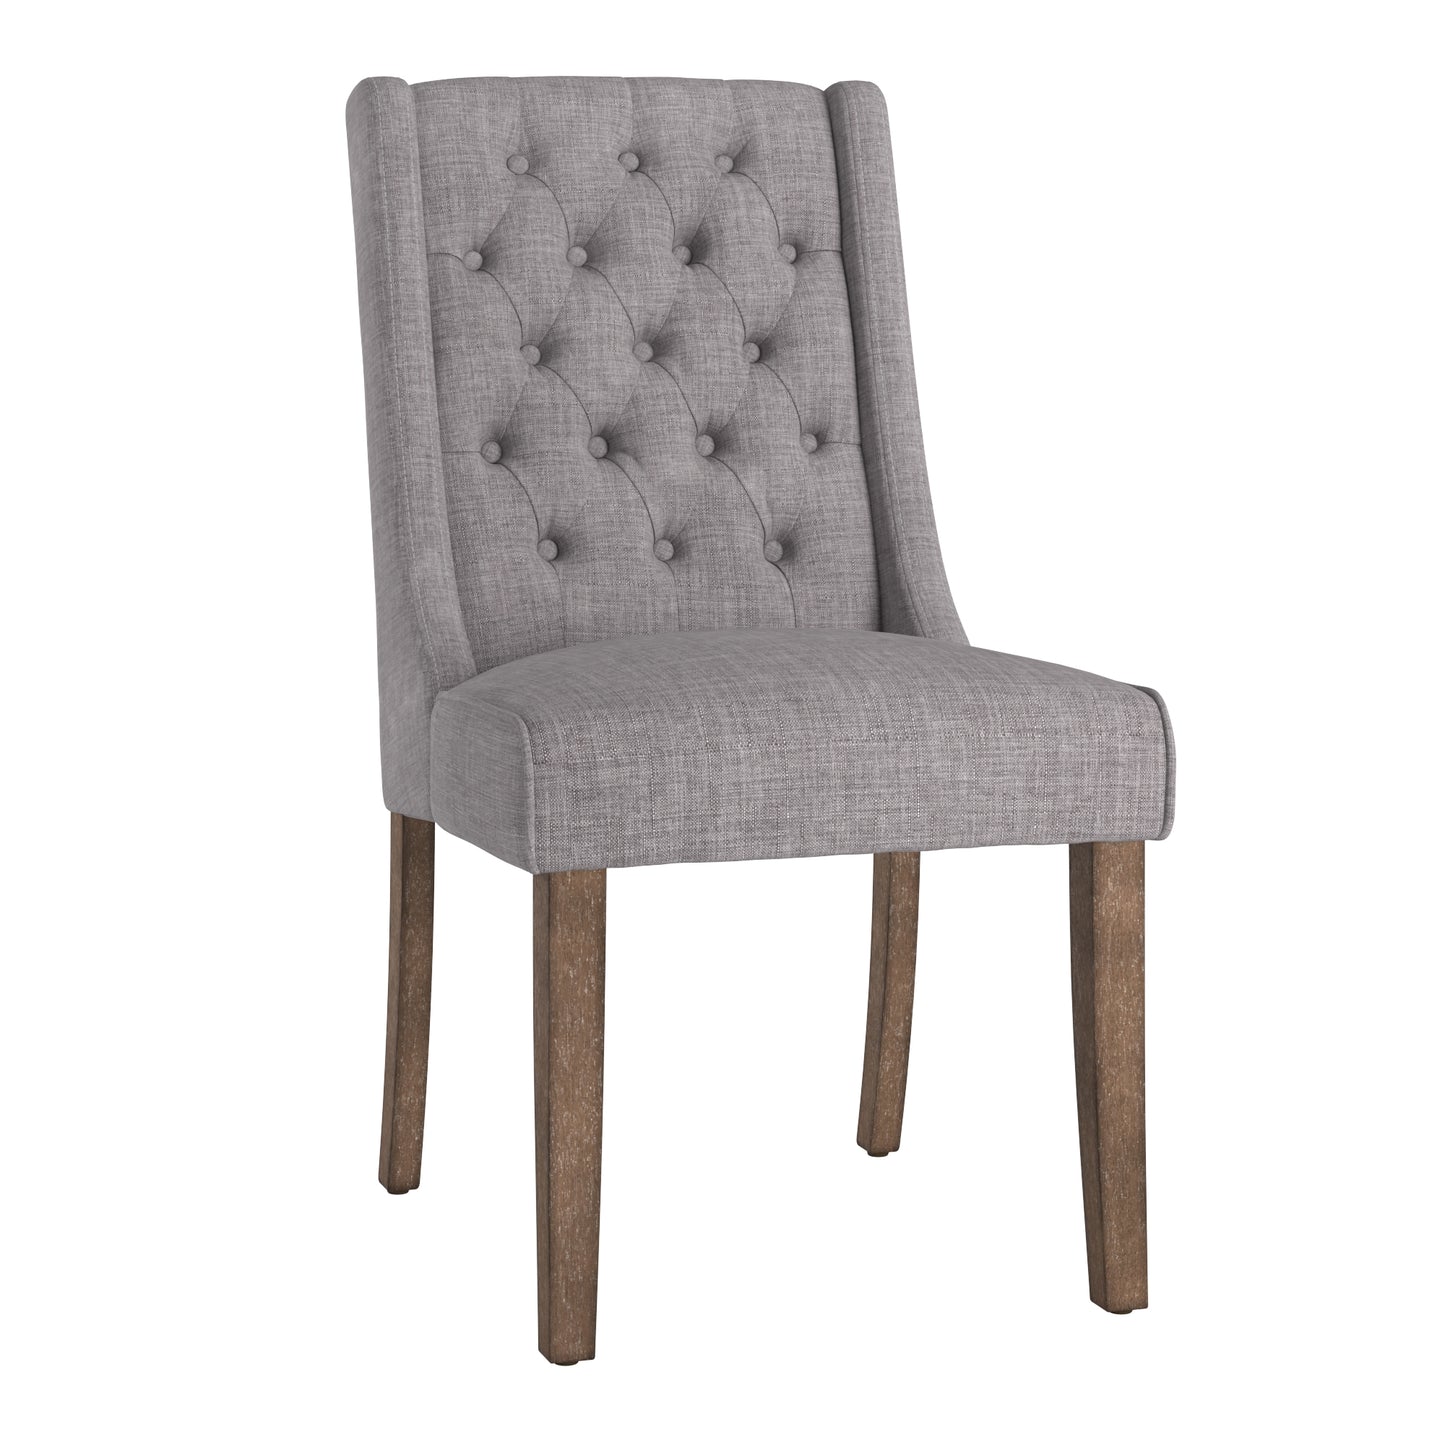 Tufted Wingback Hostess Chairs (Set of 2) - Grey Linen